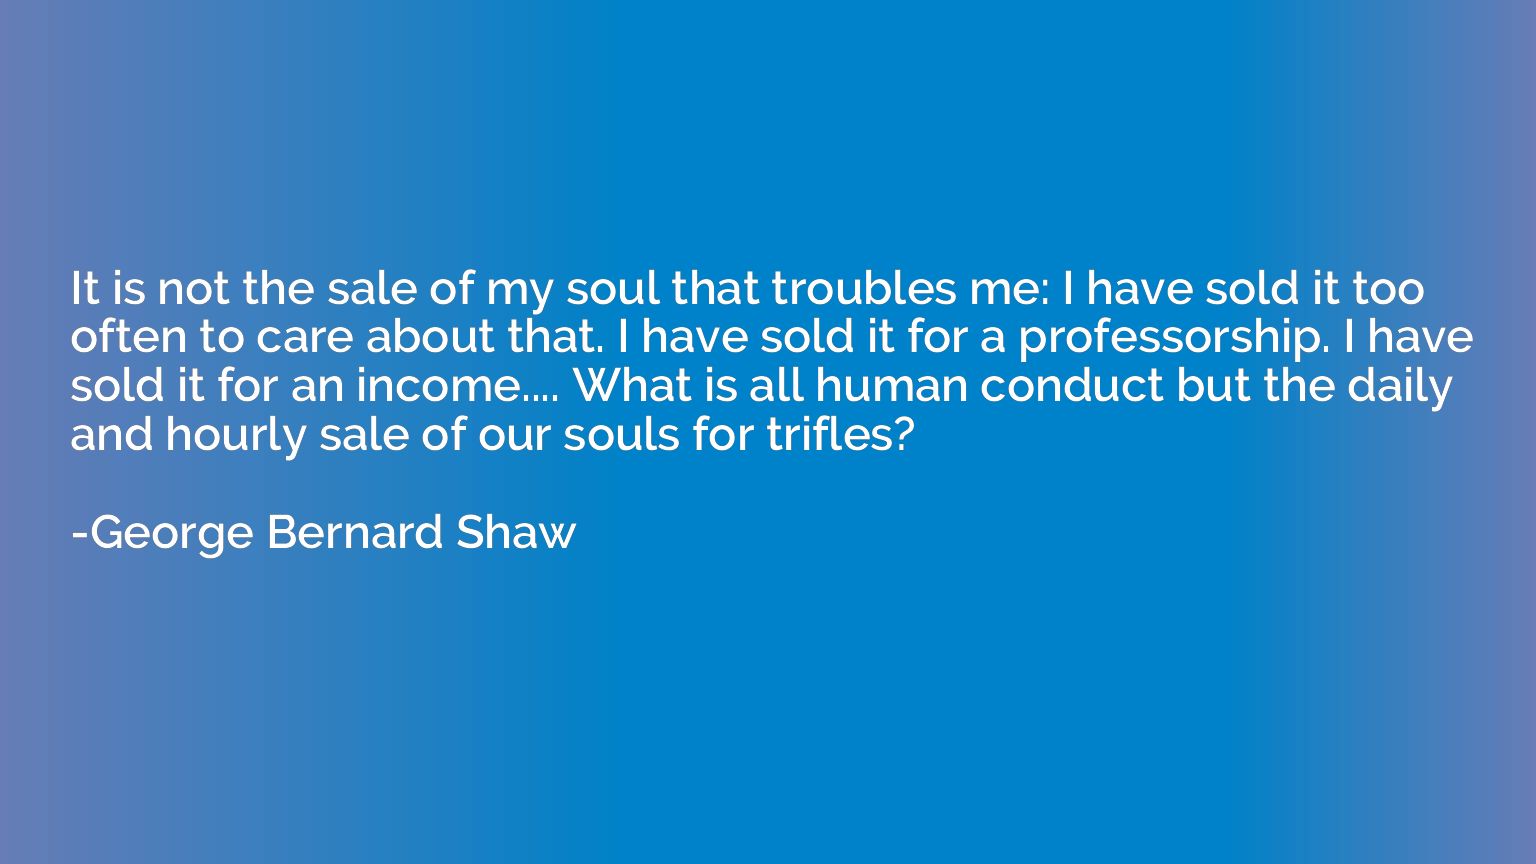 It is not the sale of my soul that troubles me: I have sold 